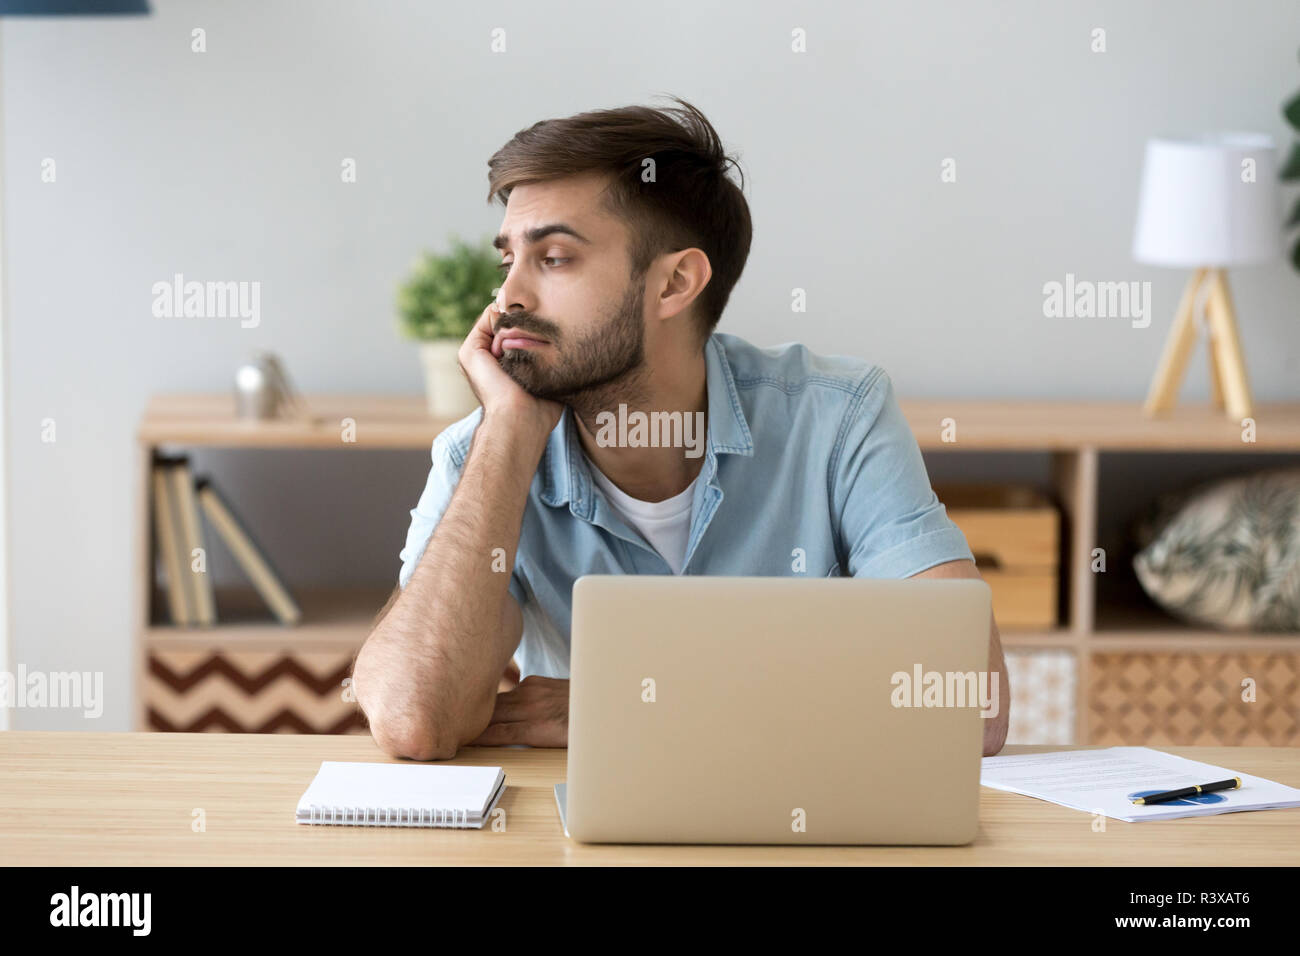 Tired man distracted from computer work lacking motivation Stock Photo